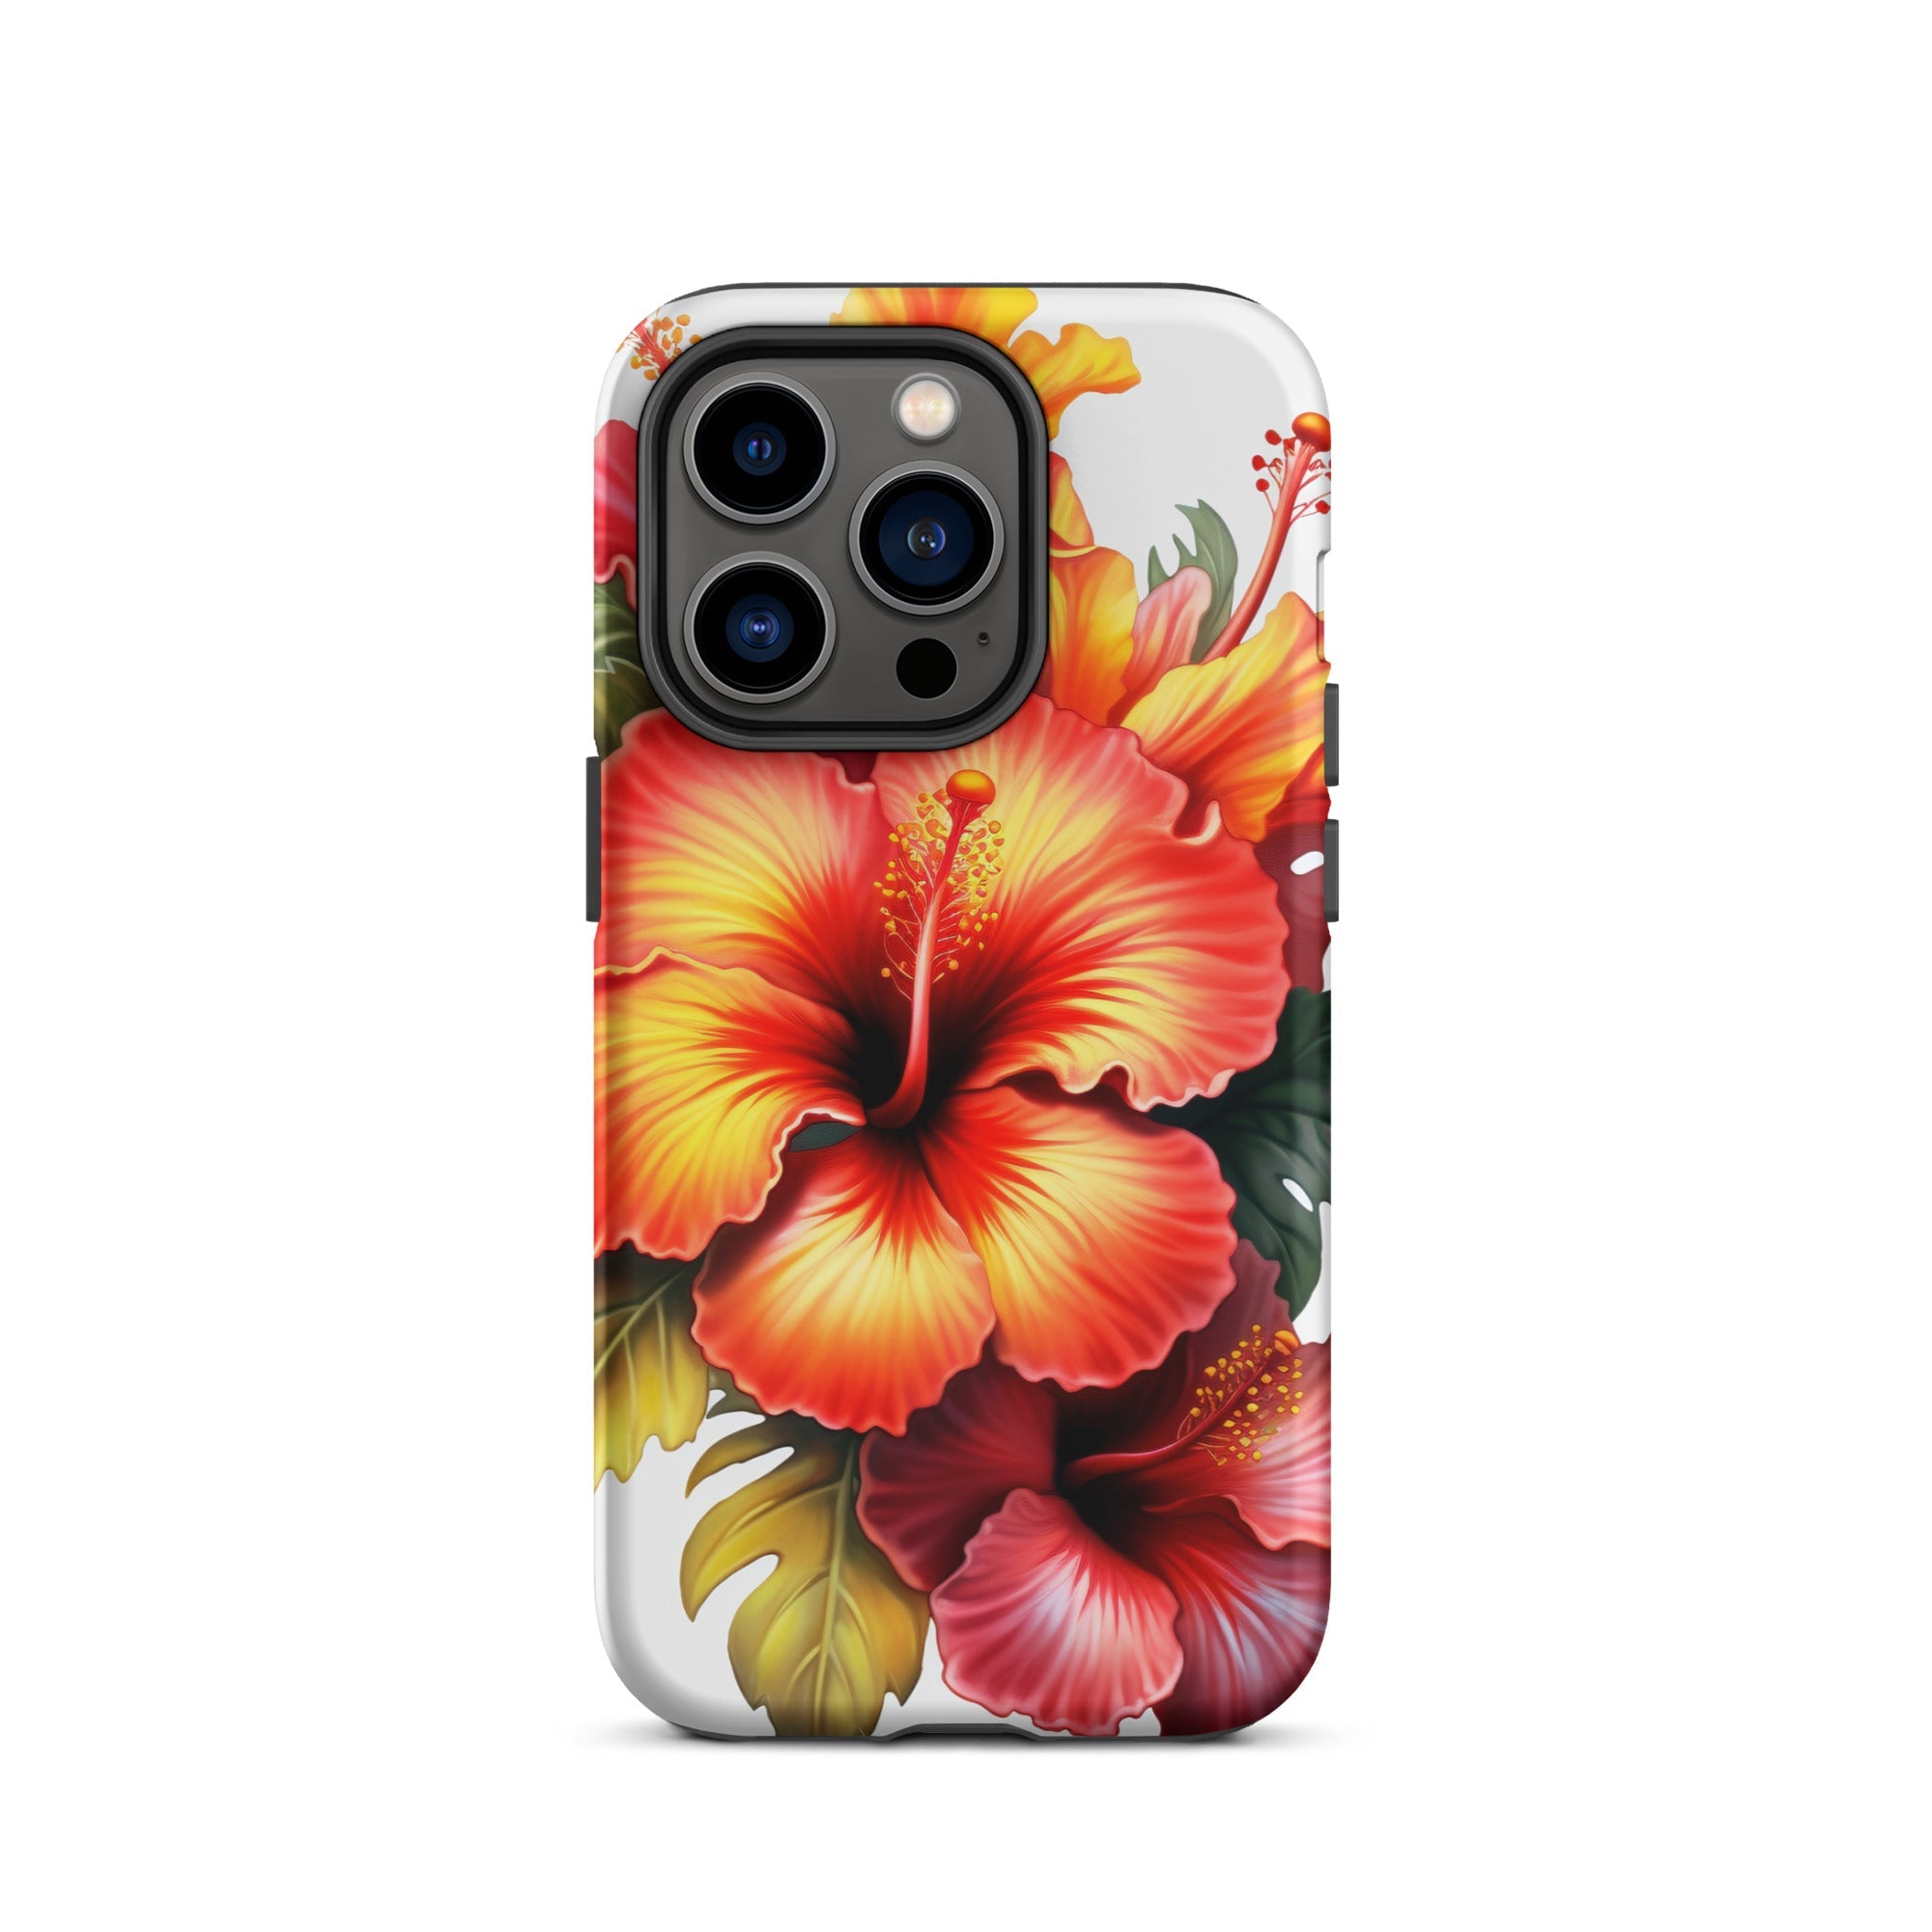 Hibiscus Flower iPhone Case by Visual Verse - Image 28